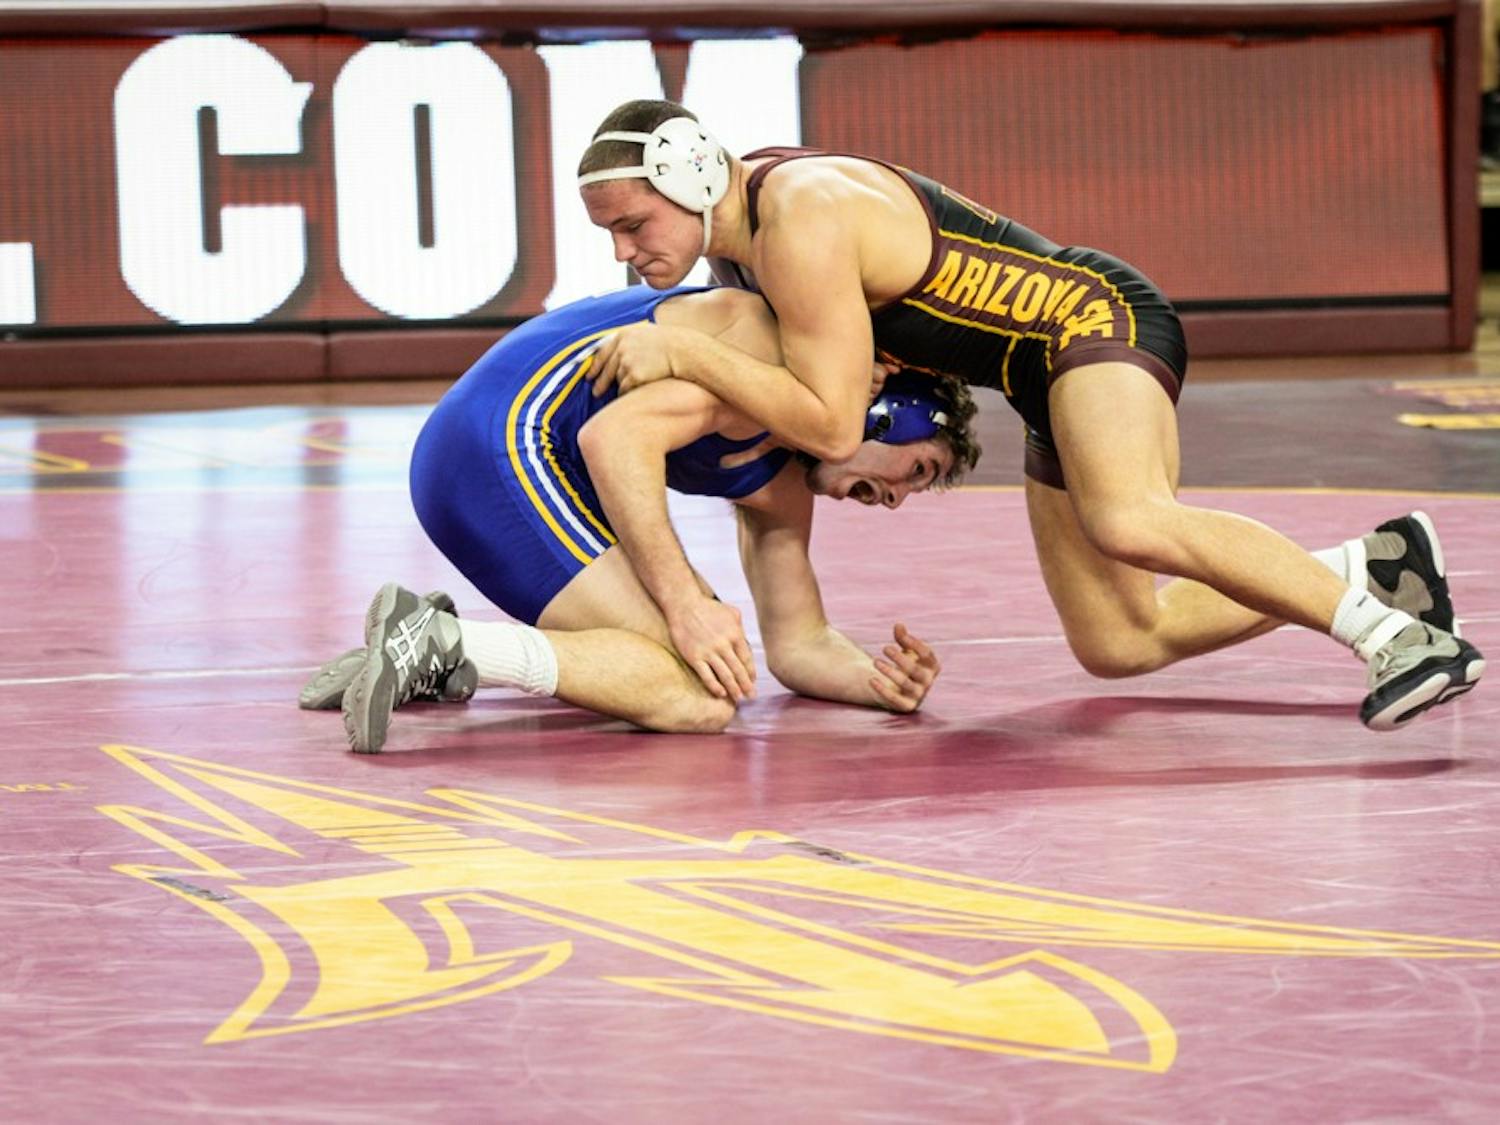 ASU wrestling's Blake Stauffer takes control early in his match against Roadrunner Sean Pollock on Saturday, Jan. 18, 2015, at Wells Fargo Arena in Tempe. The Sun Devils went on to win against the Roadrunners 28-6.